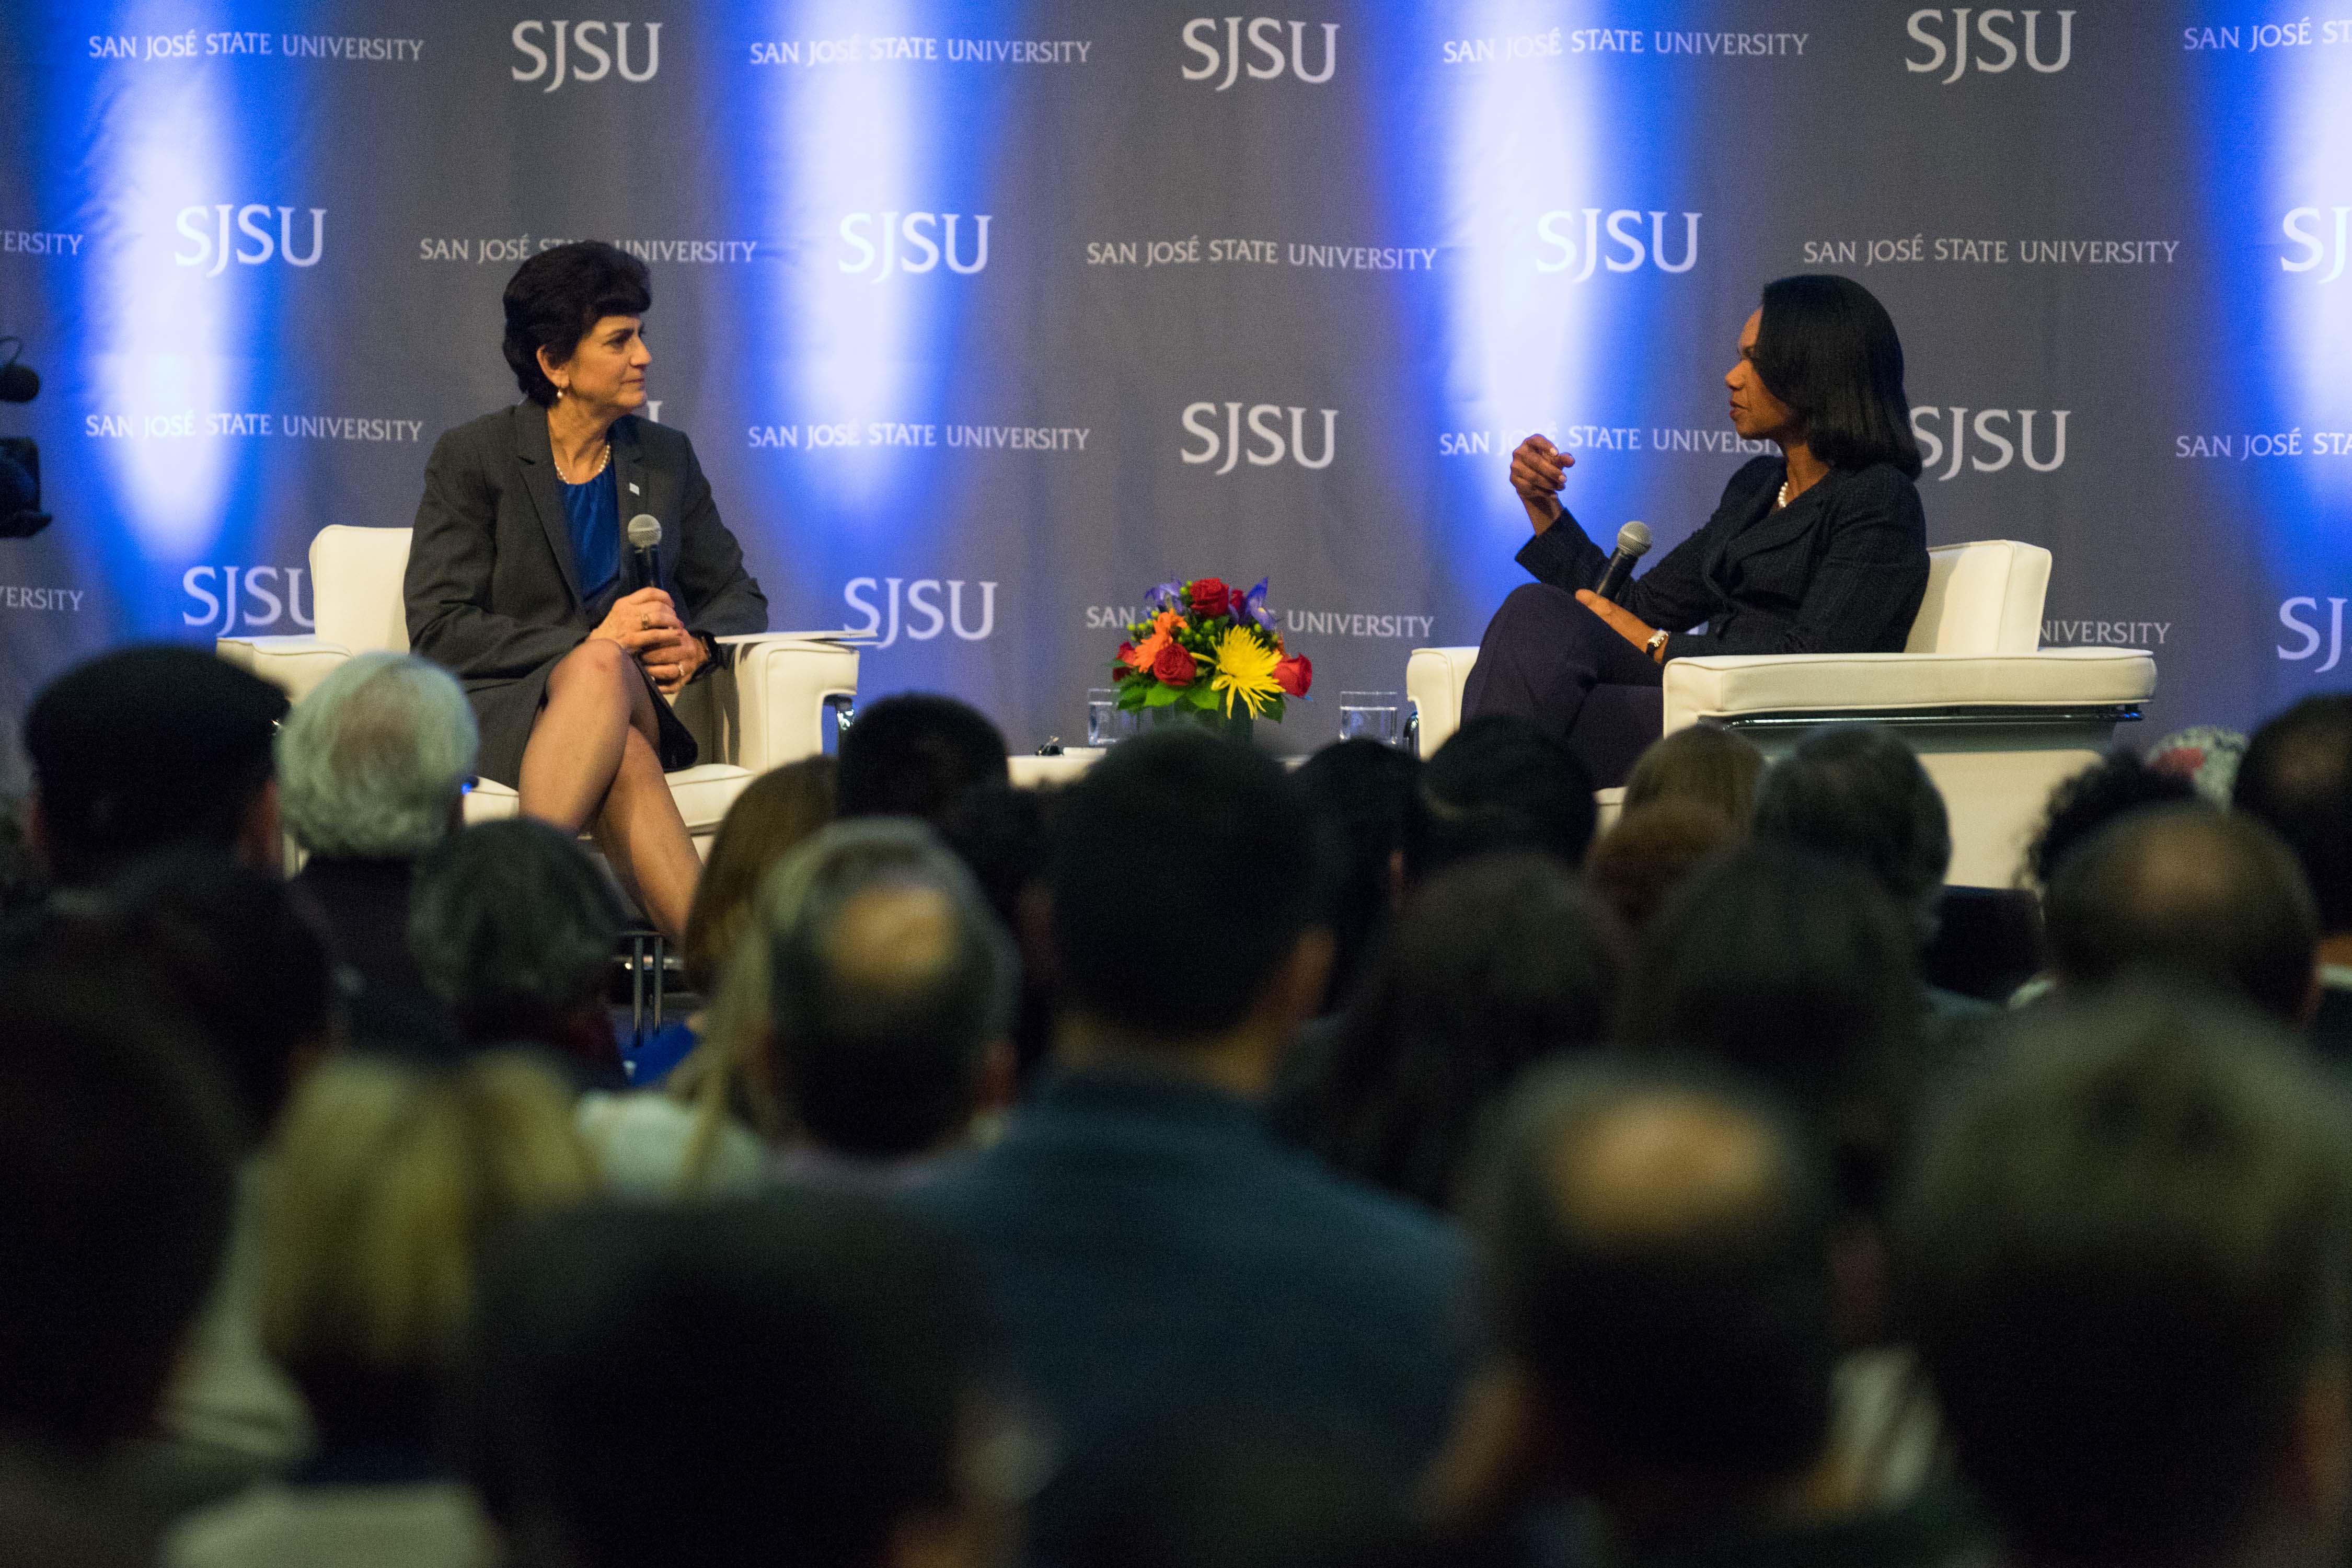 President Papazian in conversation with Condoleezza Rice, Secretary of State, 2005-2009 (Photo: James Tensuan, ’15 Photojournalism).